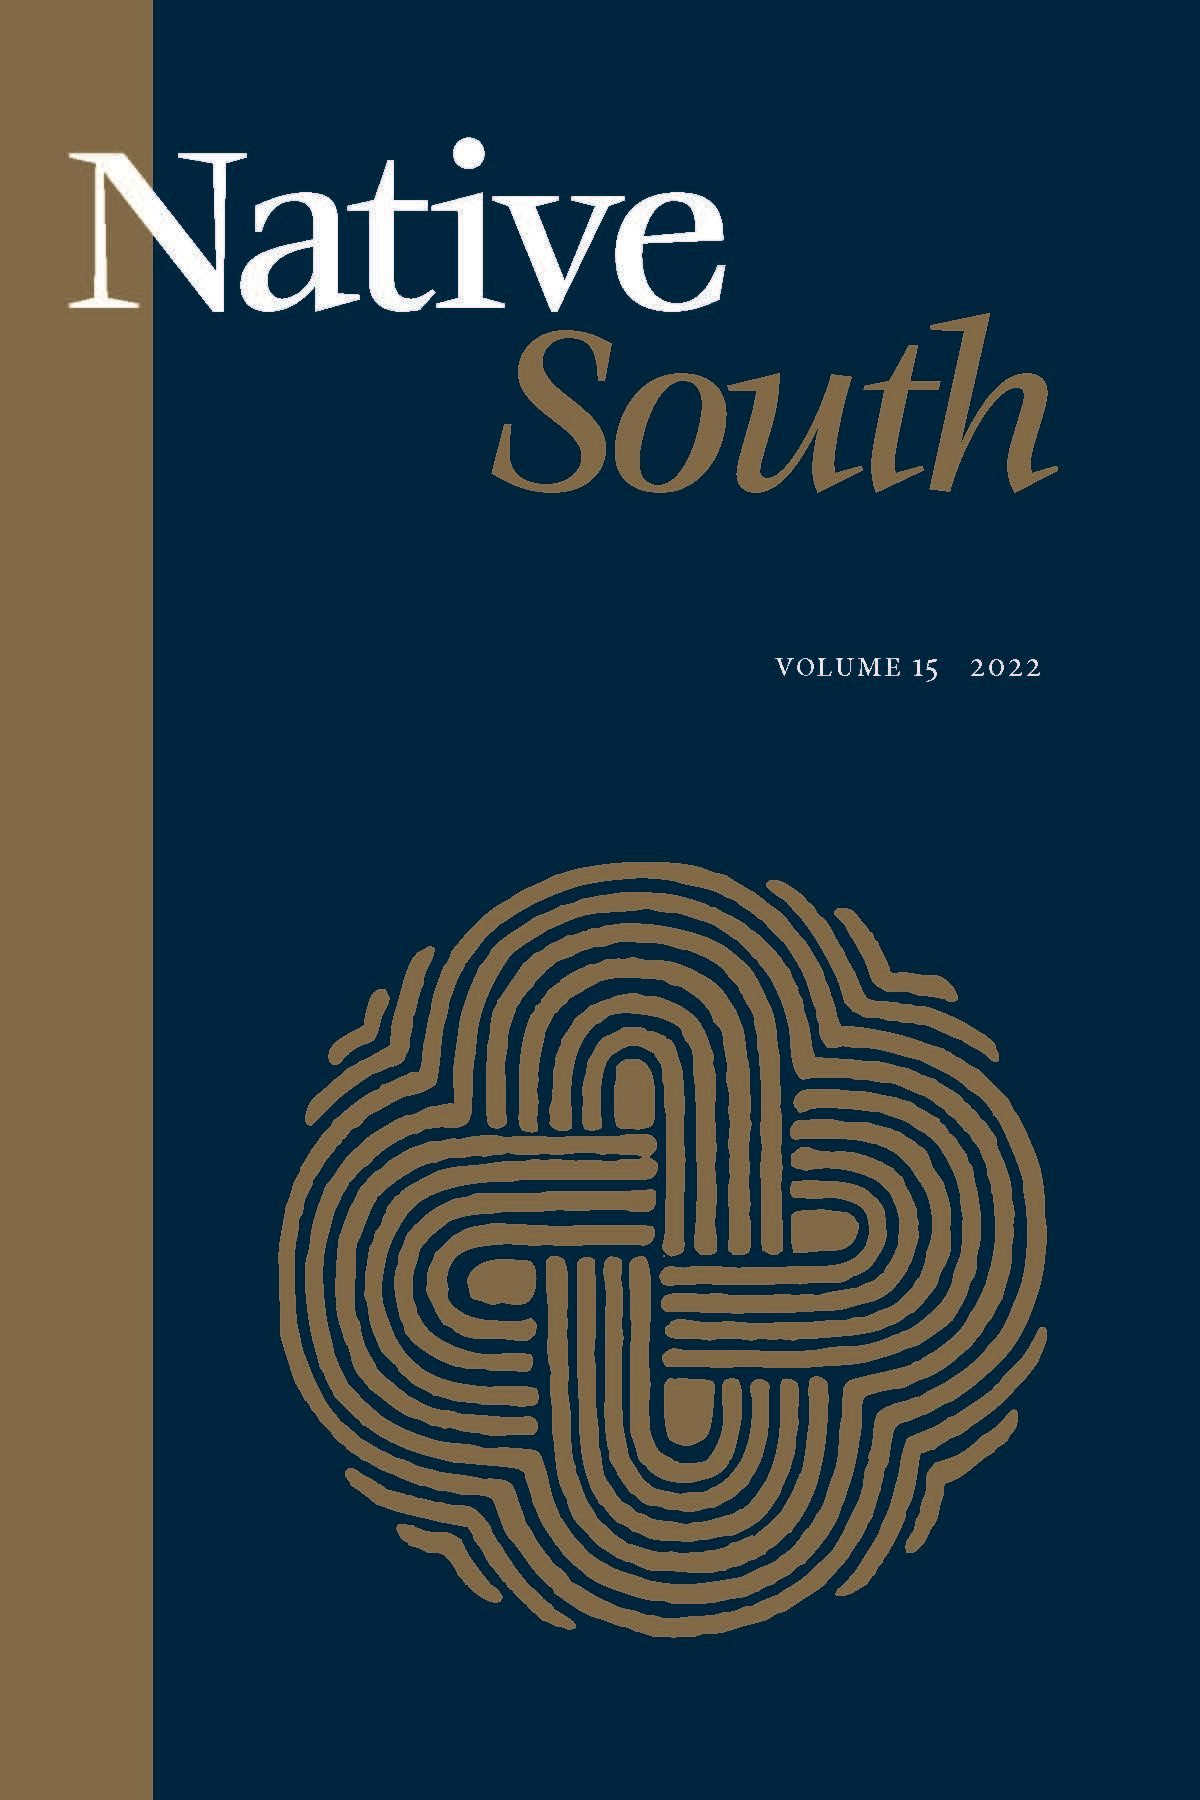 Native South cover. Features a gold-colored motif on a blue background.